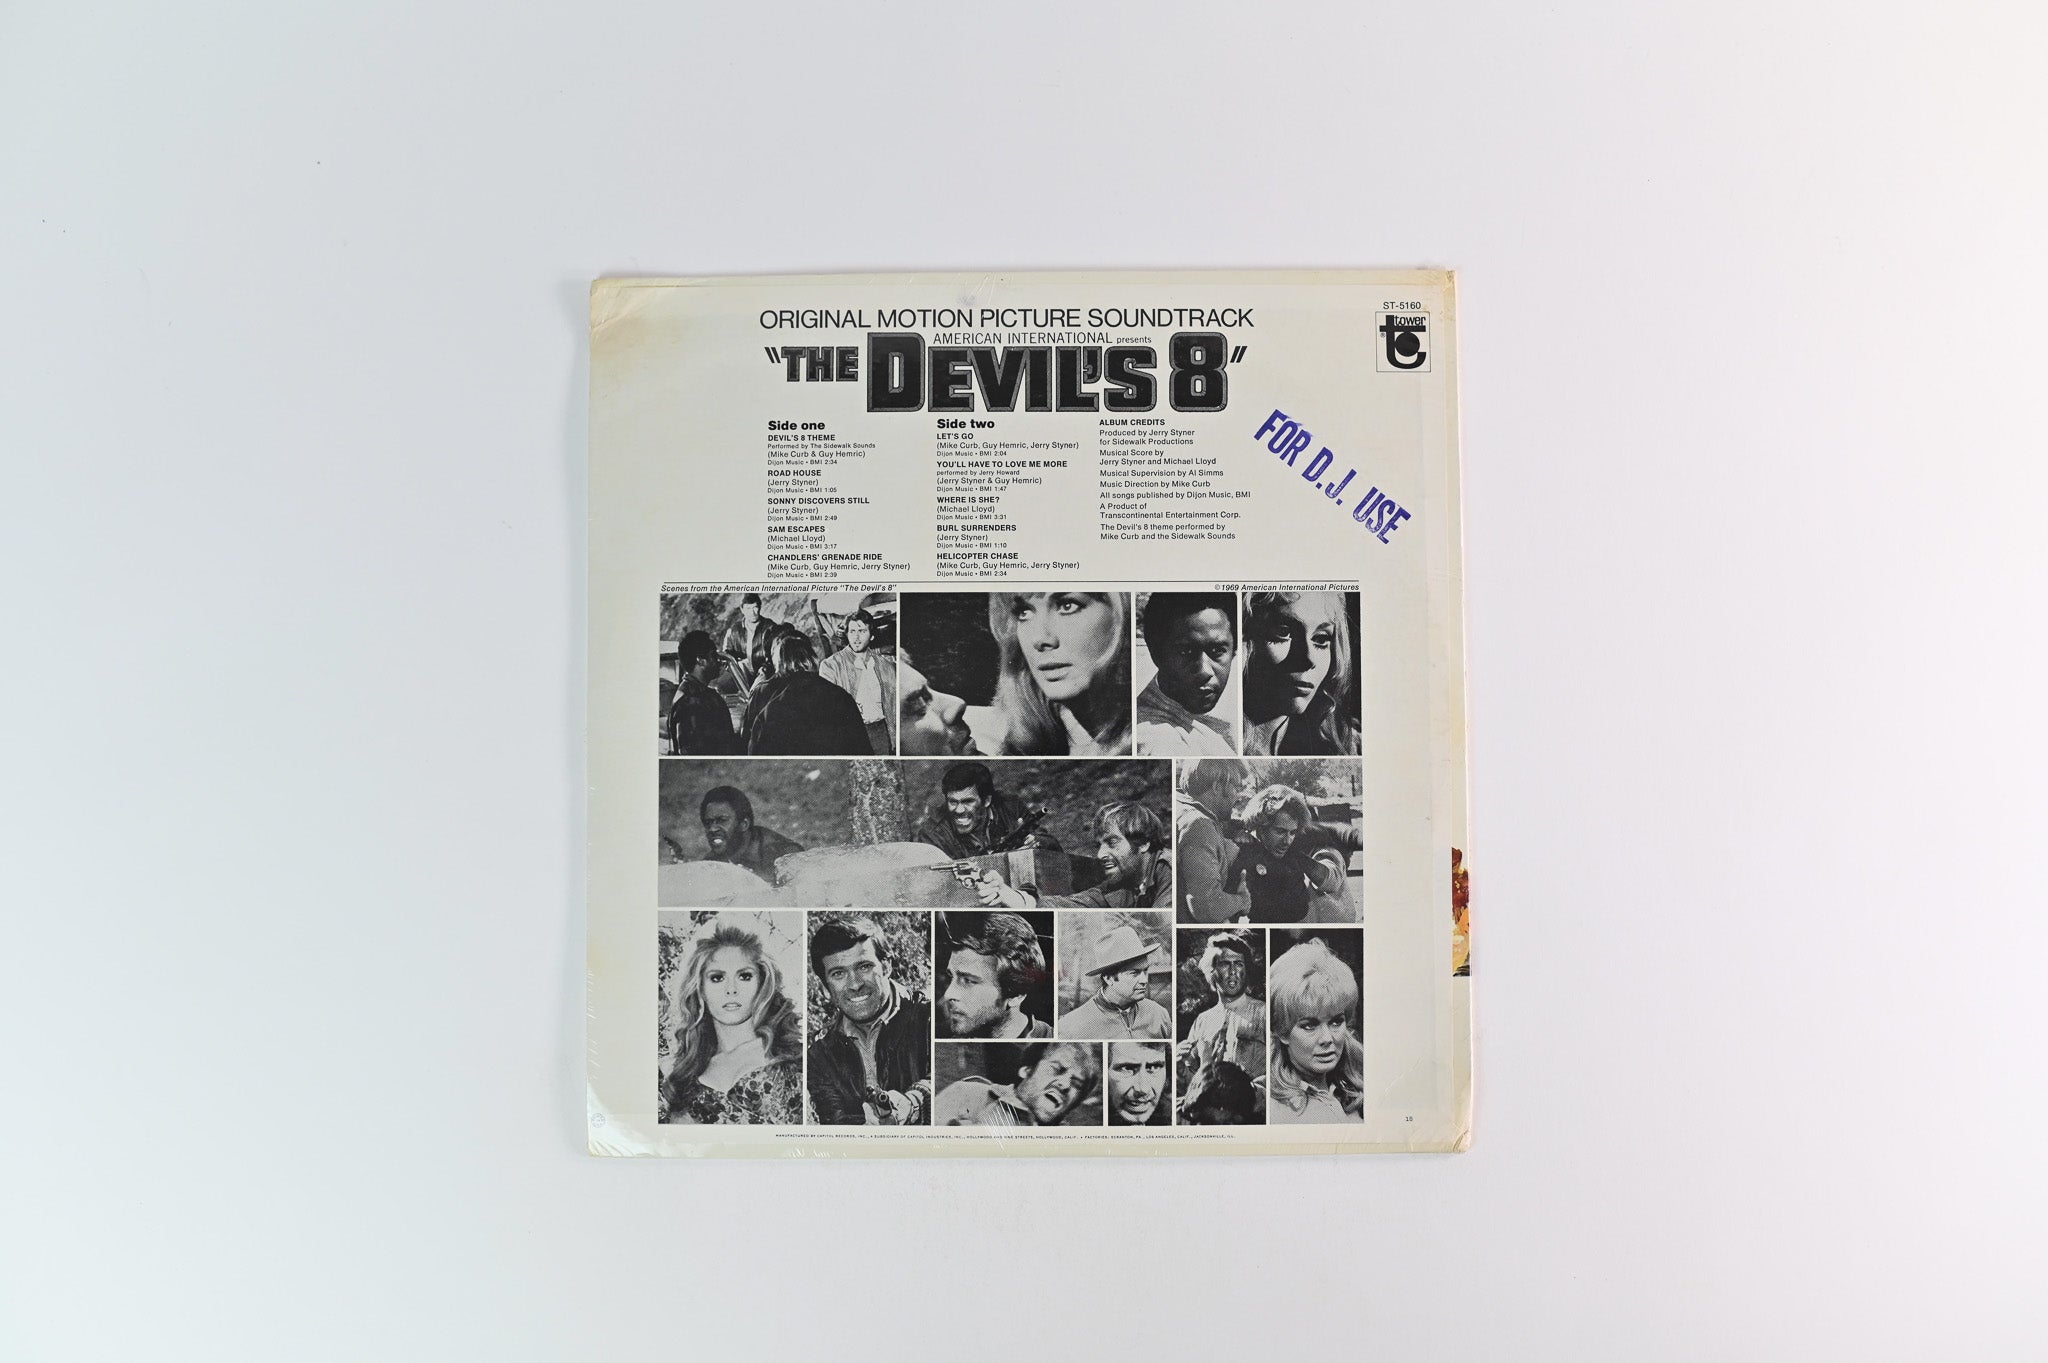 Jerry Styner - The Devil's 8 (Original Motion Picture Soundtrack) on Tower Sealed